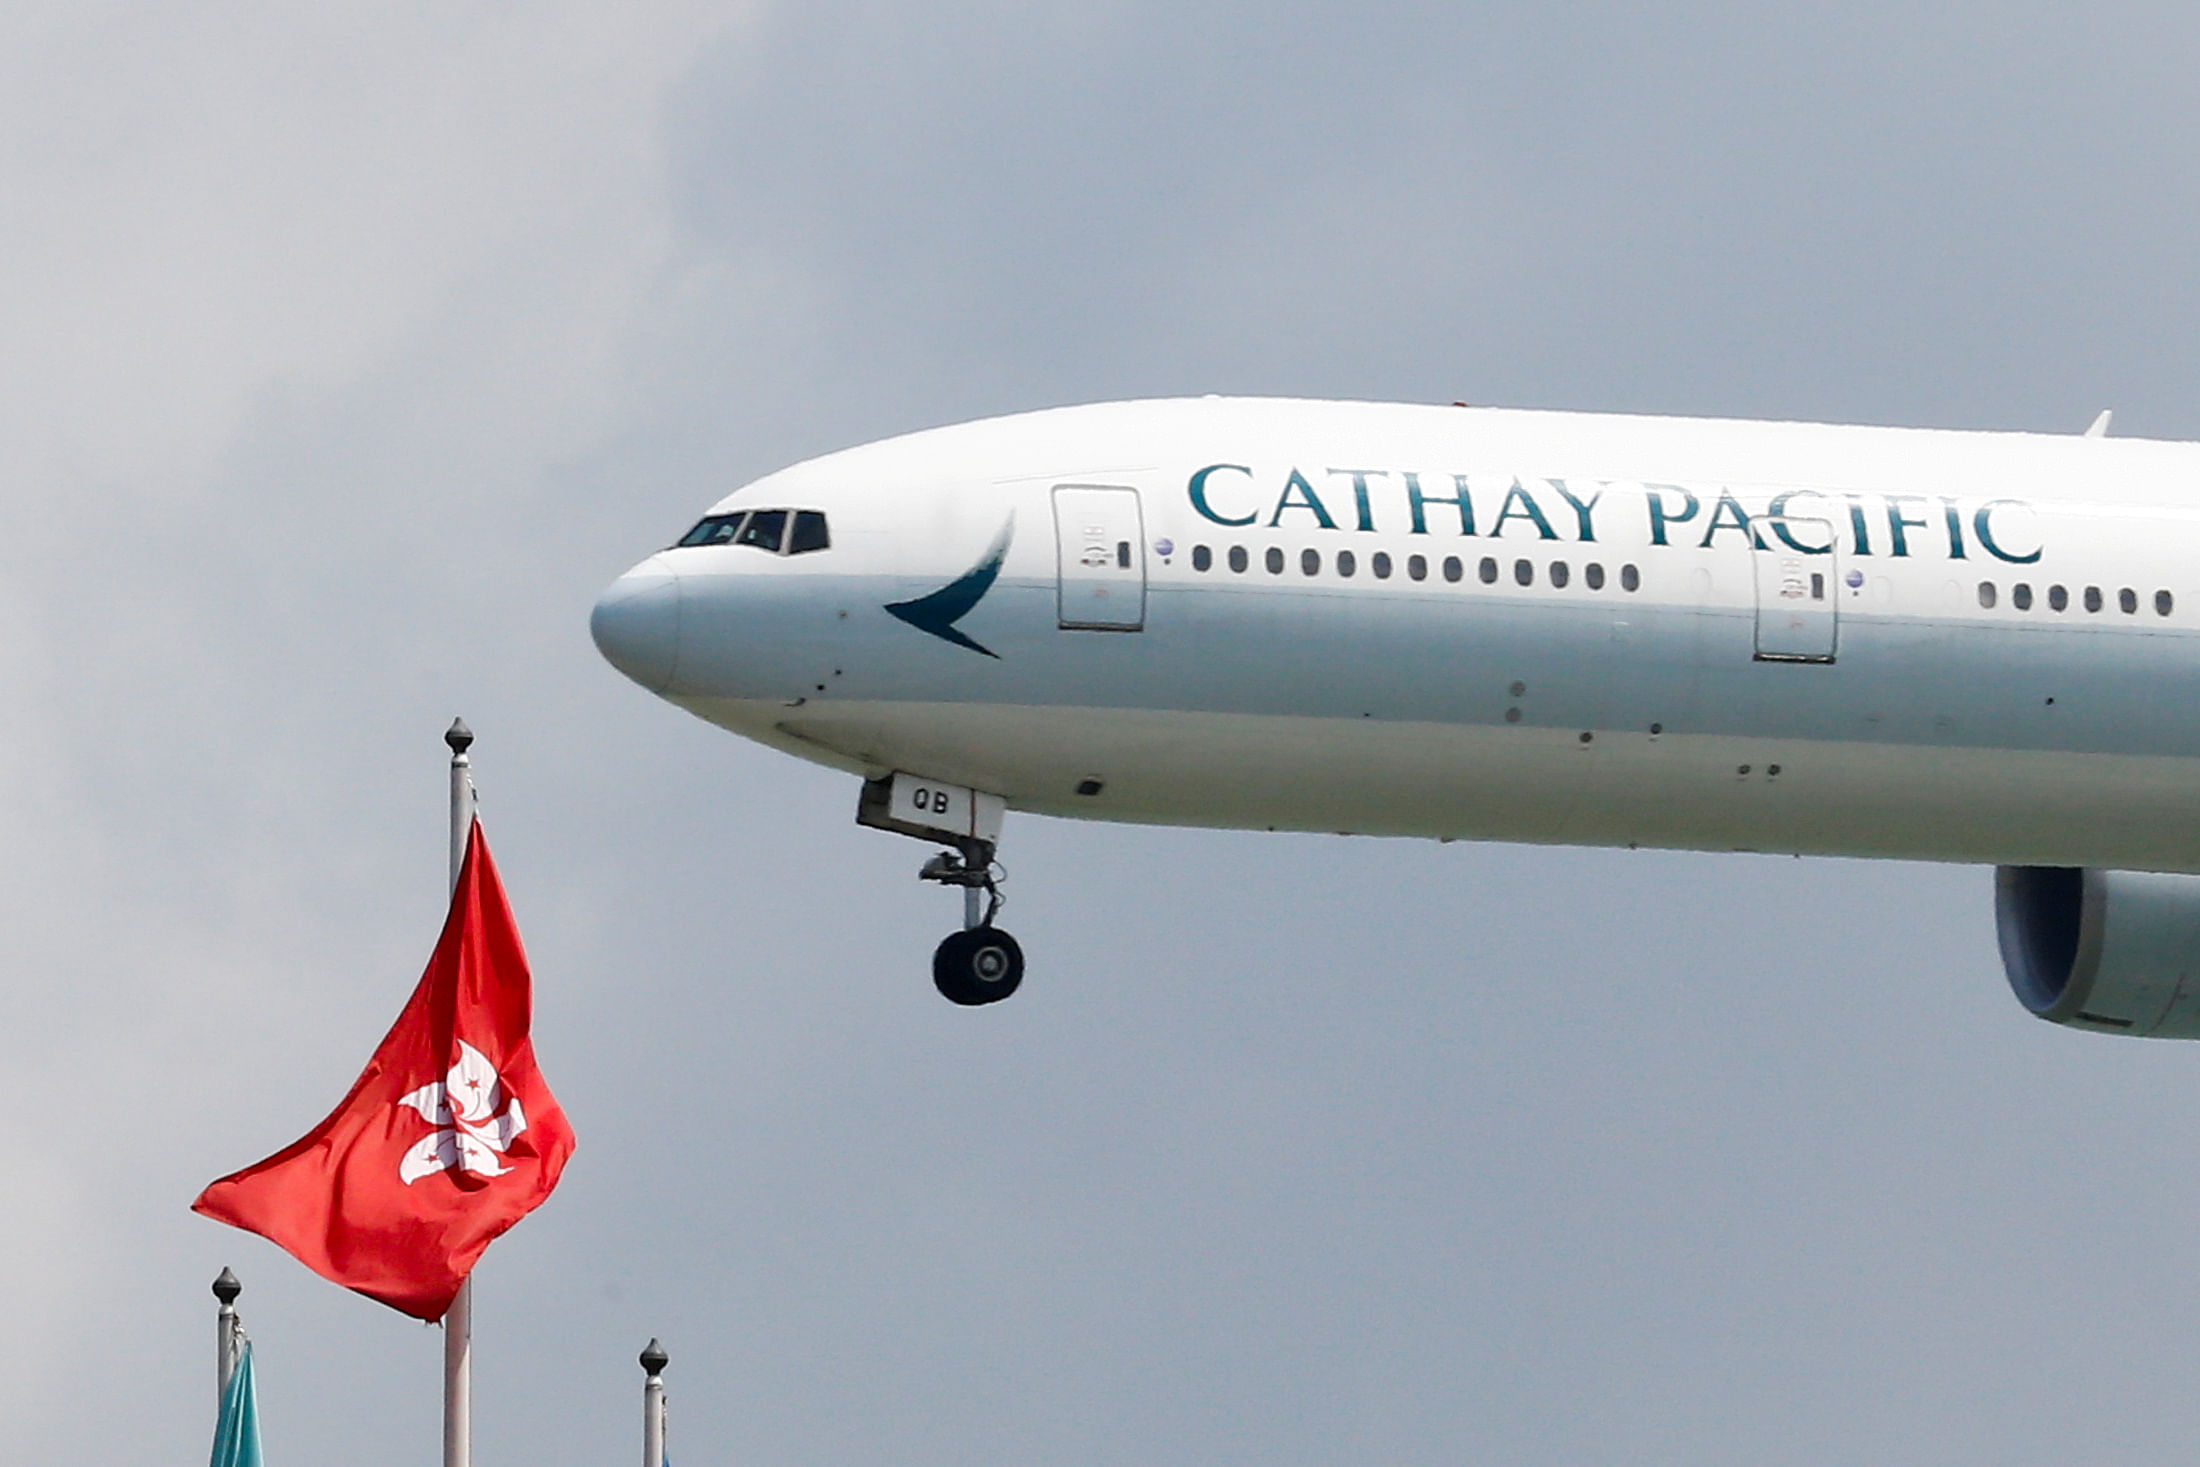 A Cathay Pacific plane. (Reuters Photo)